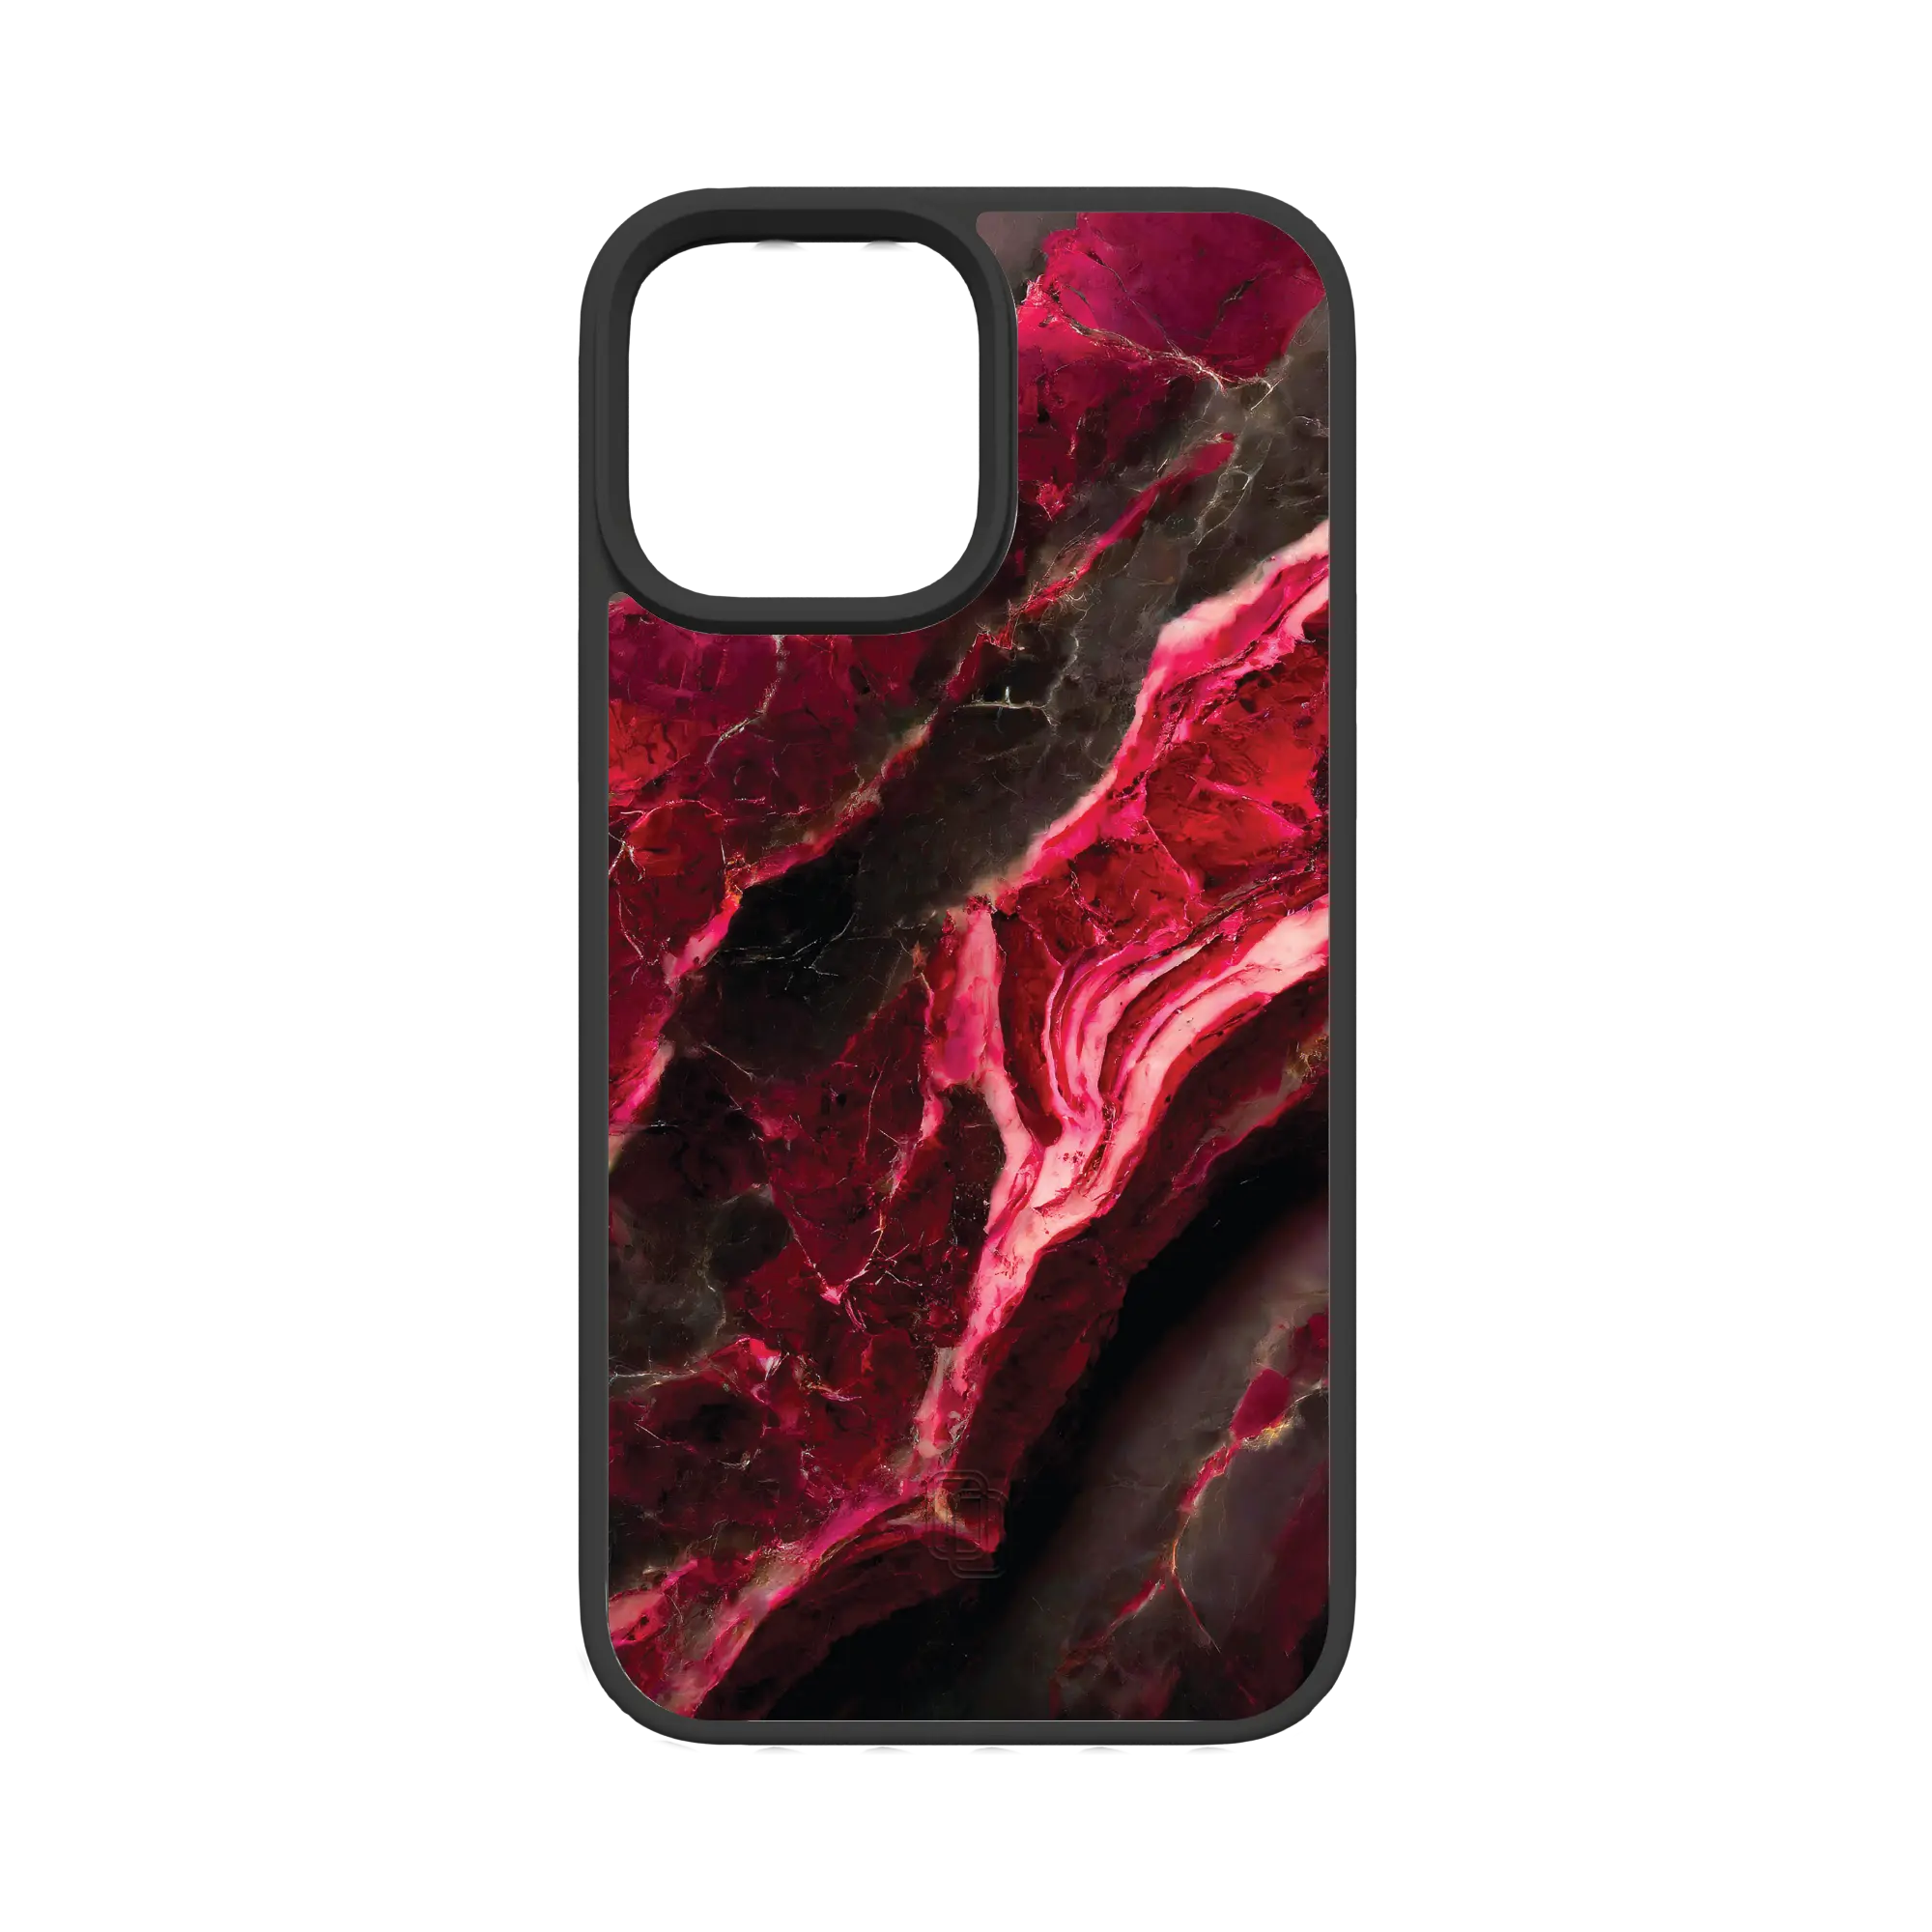 Apple-iPhone-12-Pro-Max-Crystal-Clear Morning Sun | Custom MagSafe Red Marble Case for Apple iPhone 12 Series cellhelmet cellhelmet